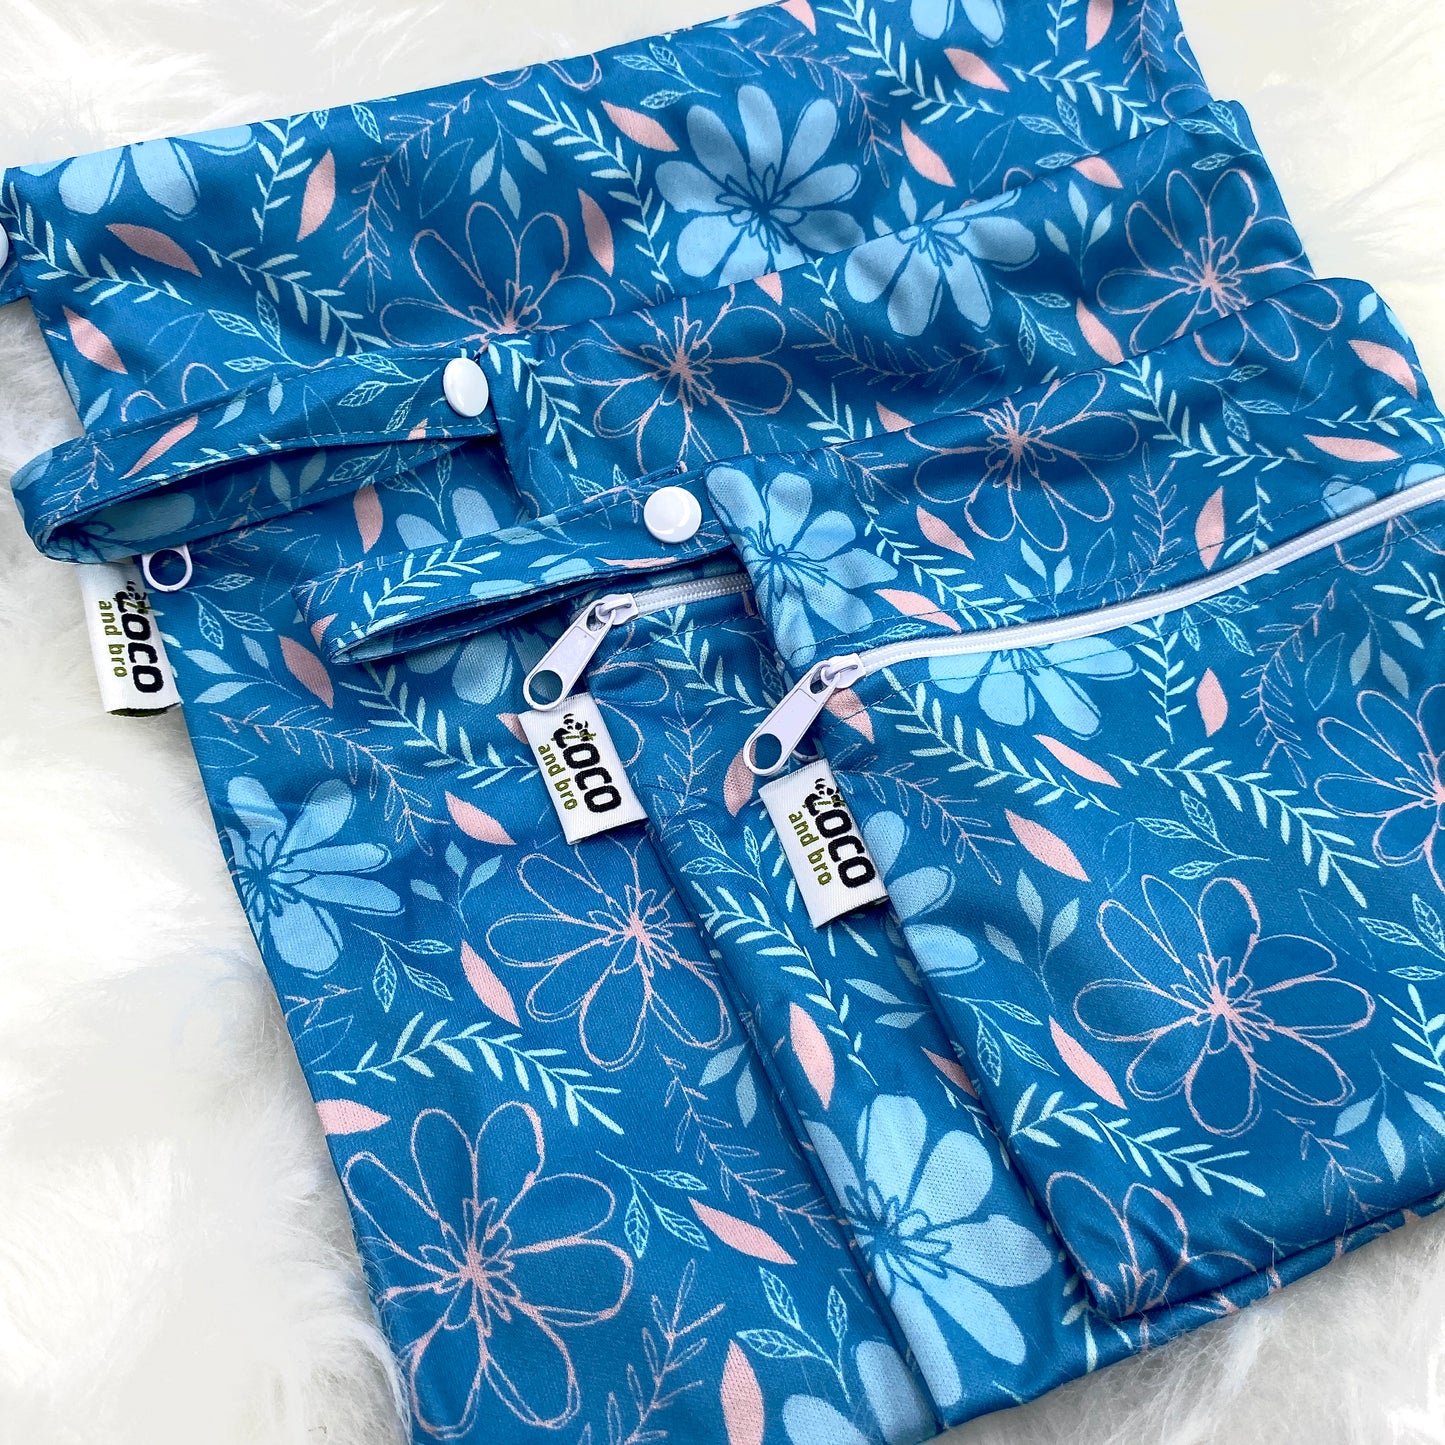 A set of three waterproof bags in a blue floral design, made from bamboo and in three different sizes. Each bag has a zipper closure.